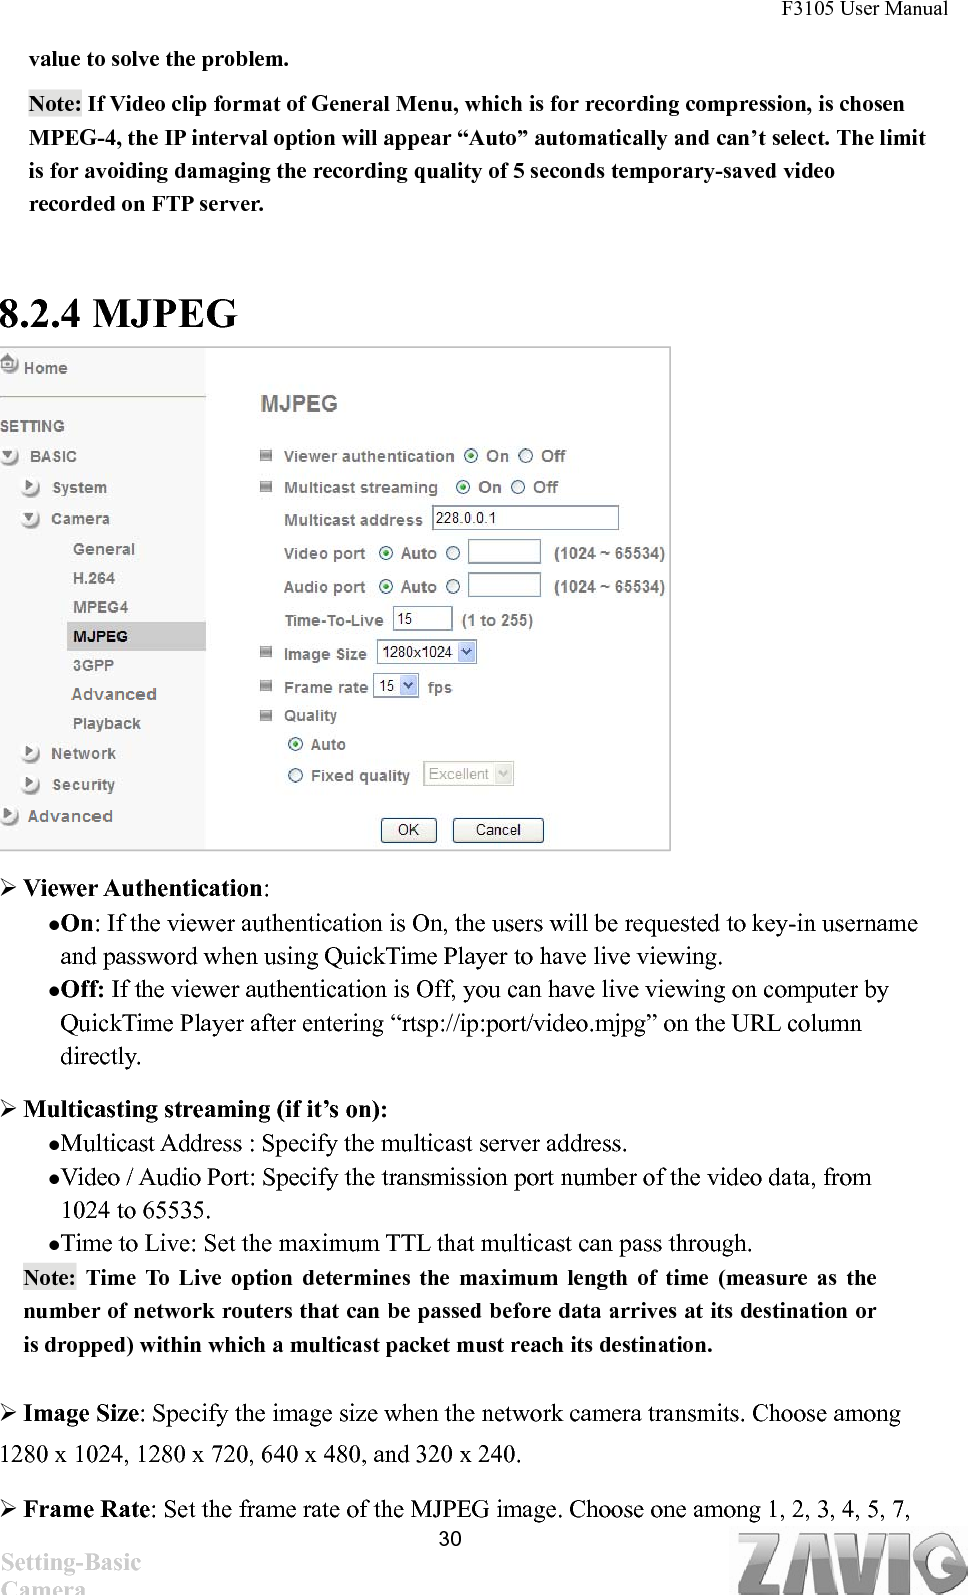 F3105 User Manual   value to solve the problem. Note: If Video clip format of General Menu, which is for recording compression, is chosen MPEG-4, the IP interval option will appear “Auto” automatically and can’t select. The limit is for avoiding damaging the recording quality of 5 seconds temporary-saved video recorded on FTP server.      8.2.4 MJPEG                Viewer Authentication:  On: If the viewer authentication is On, the users will be requested to key-in username and password when using QuickTime Player to have live viewing. Off: If the viewer authentication is Off, you can have live viewing on computer by QuickTime Player after entering “rtsp://ip:port/video.mjpg” on the URL column directly.   Multicasting streaming (if it’s on):   Multicast Address : Specify the multicast server address.   Video / Audio Port: Specify the transmission port number of the video data, from 1024 to 65535. Time to Live: Set the maximum TTL that multicast can pass through.   Note: Time To Live option determines the maximum length of time (measure as the number of network routers that can be passed before data arrives at its destination or is dropped) within which a multicast packet must reach its destination.    Image Size: Specify the image size when the network camera transmits. Choose among 1280 x 1024, 1280 x 720, 640 x 480, and 320 x 240.  Frame Rate: Set the frame rate of the MJPEG image. Choose one among 1, 2, 3, 4, 5, 7,  30Setting-Basic Camera 